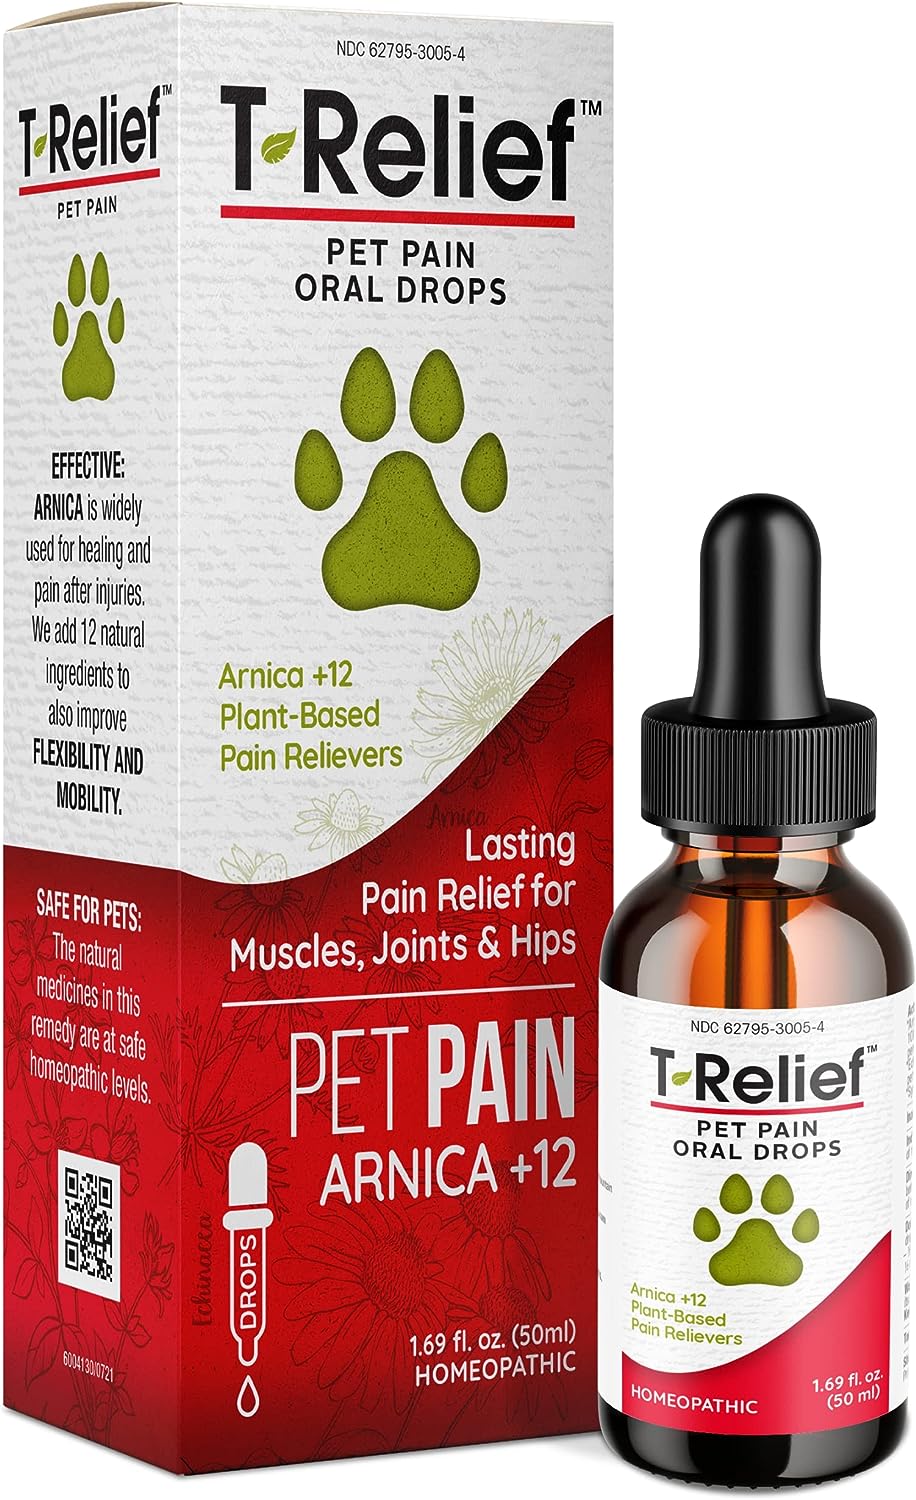 T-Relief Pet Pain Relief Drops Arnica +12 Powerful Natural Medicines Help Reduce Muscle Joint & Hip Pain Soreness Stiffness Injuries in Dogs & Cats - Fast-Acting Soother - 1.69 oz